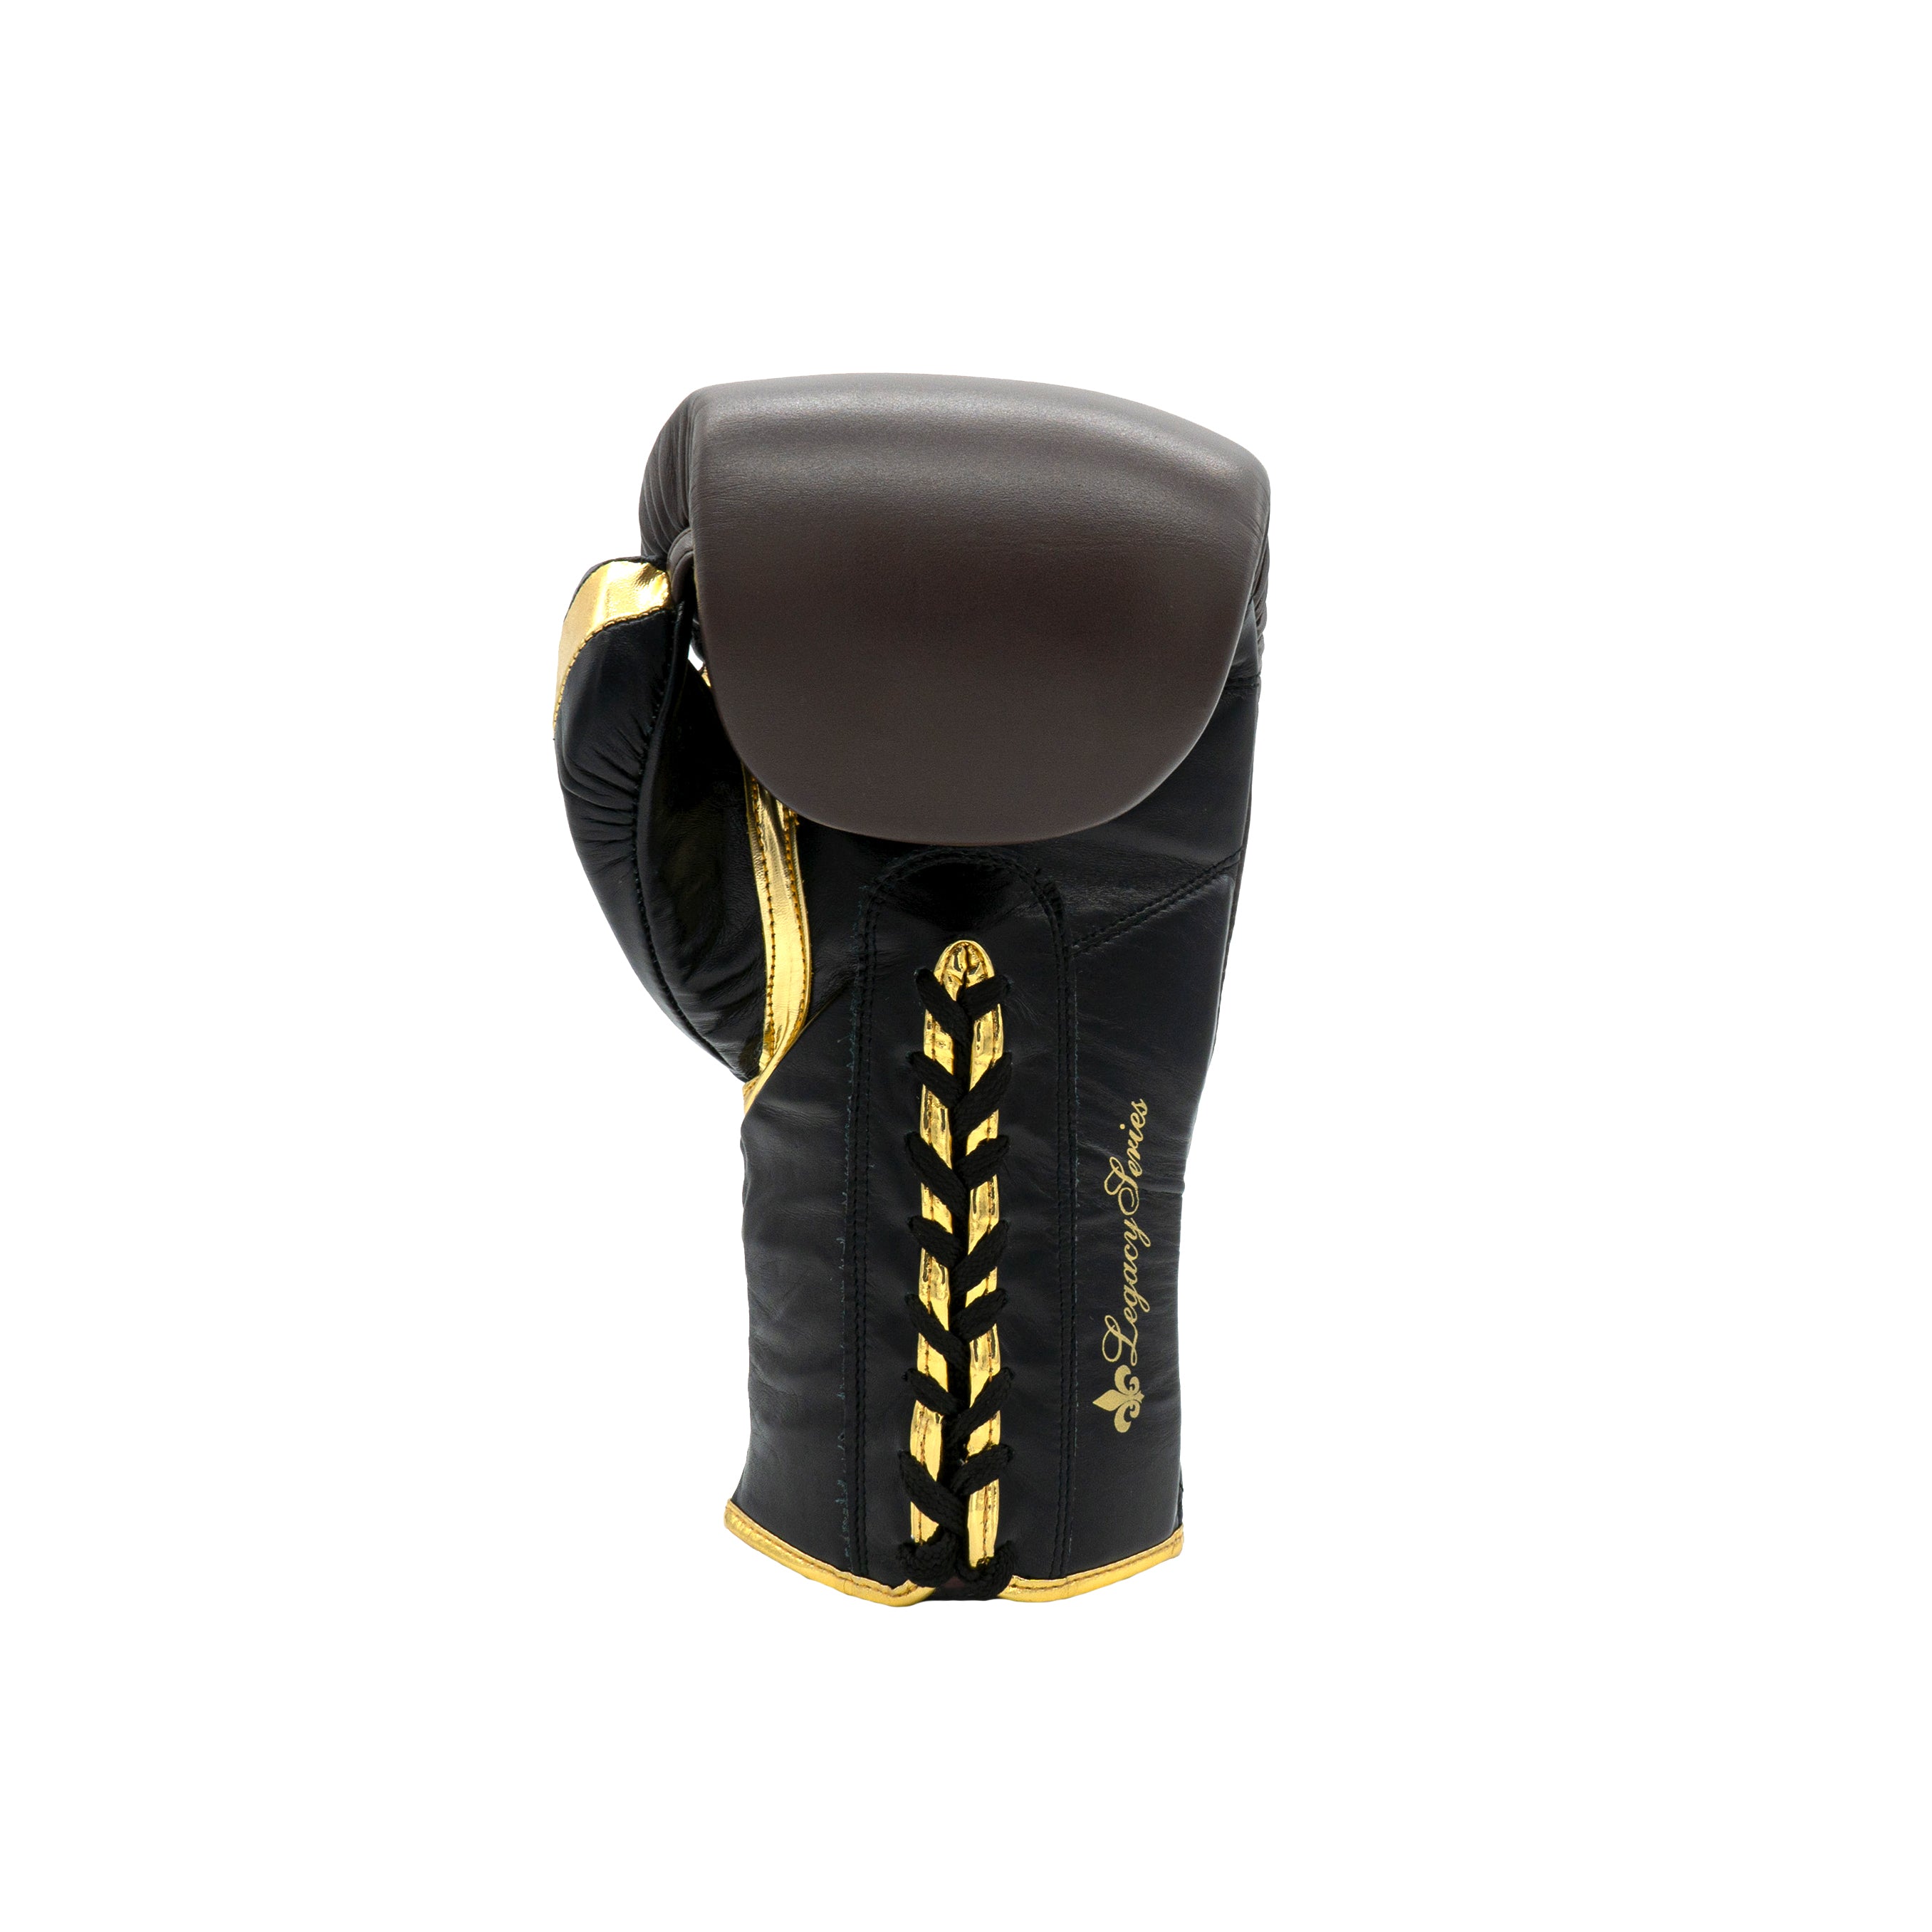 Ringside Boxing Legacy Series Lace Boxing Gloves in brown on white background reverse angle